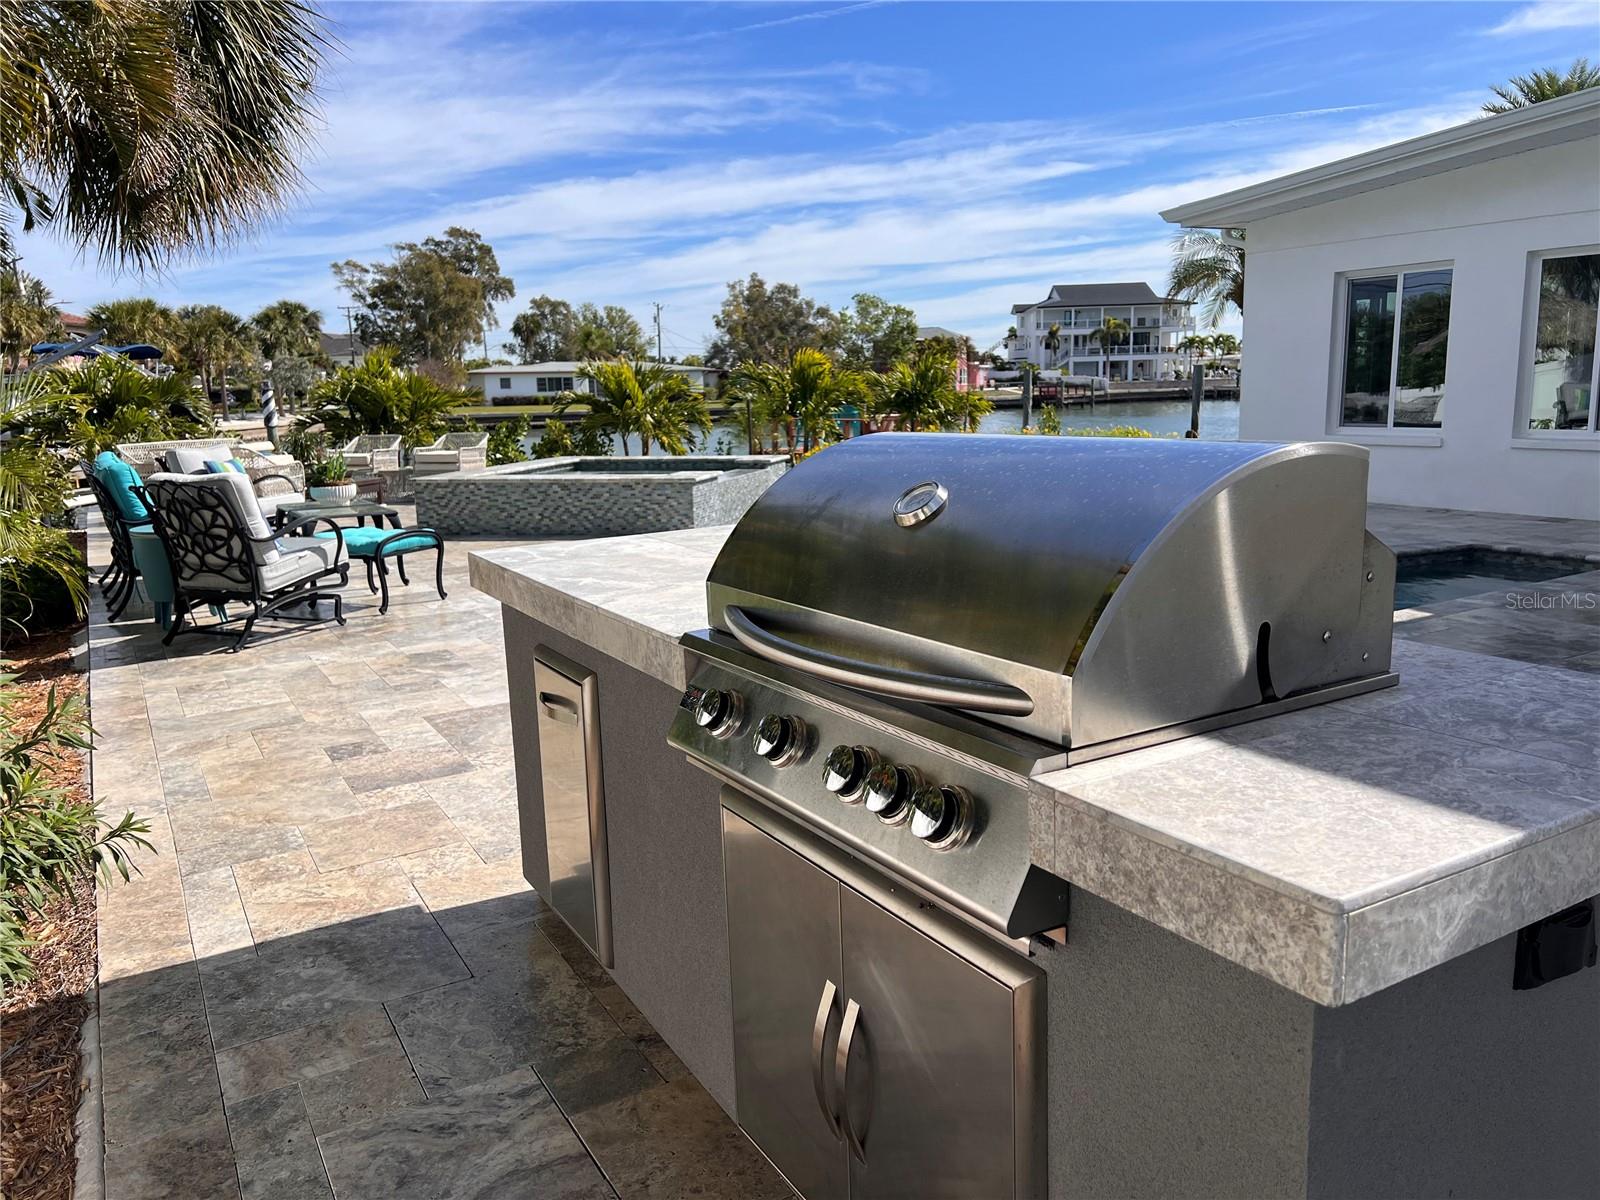 New BBQ grill and food prep island with solid surface countertop, make entertaining a breeze!